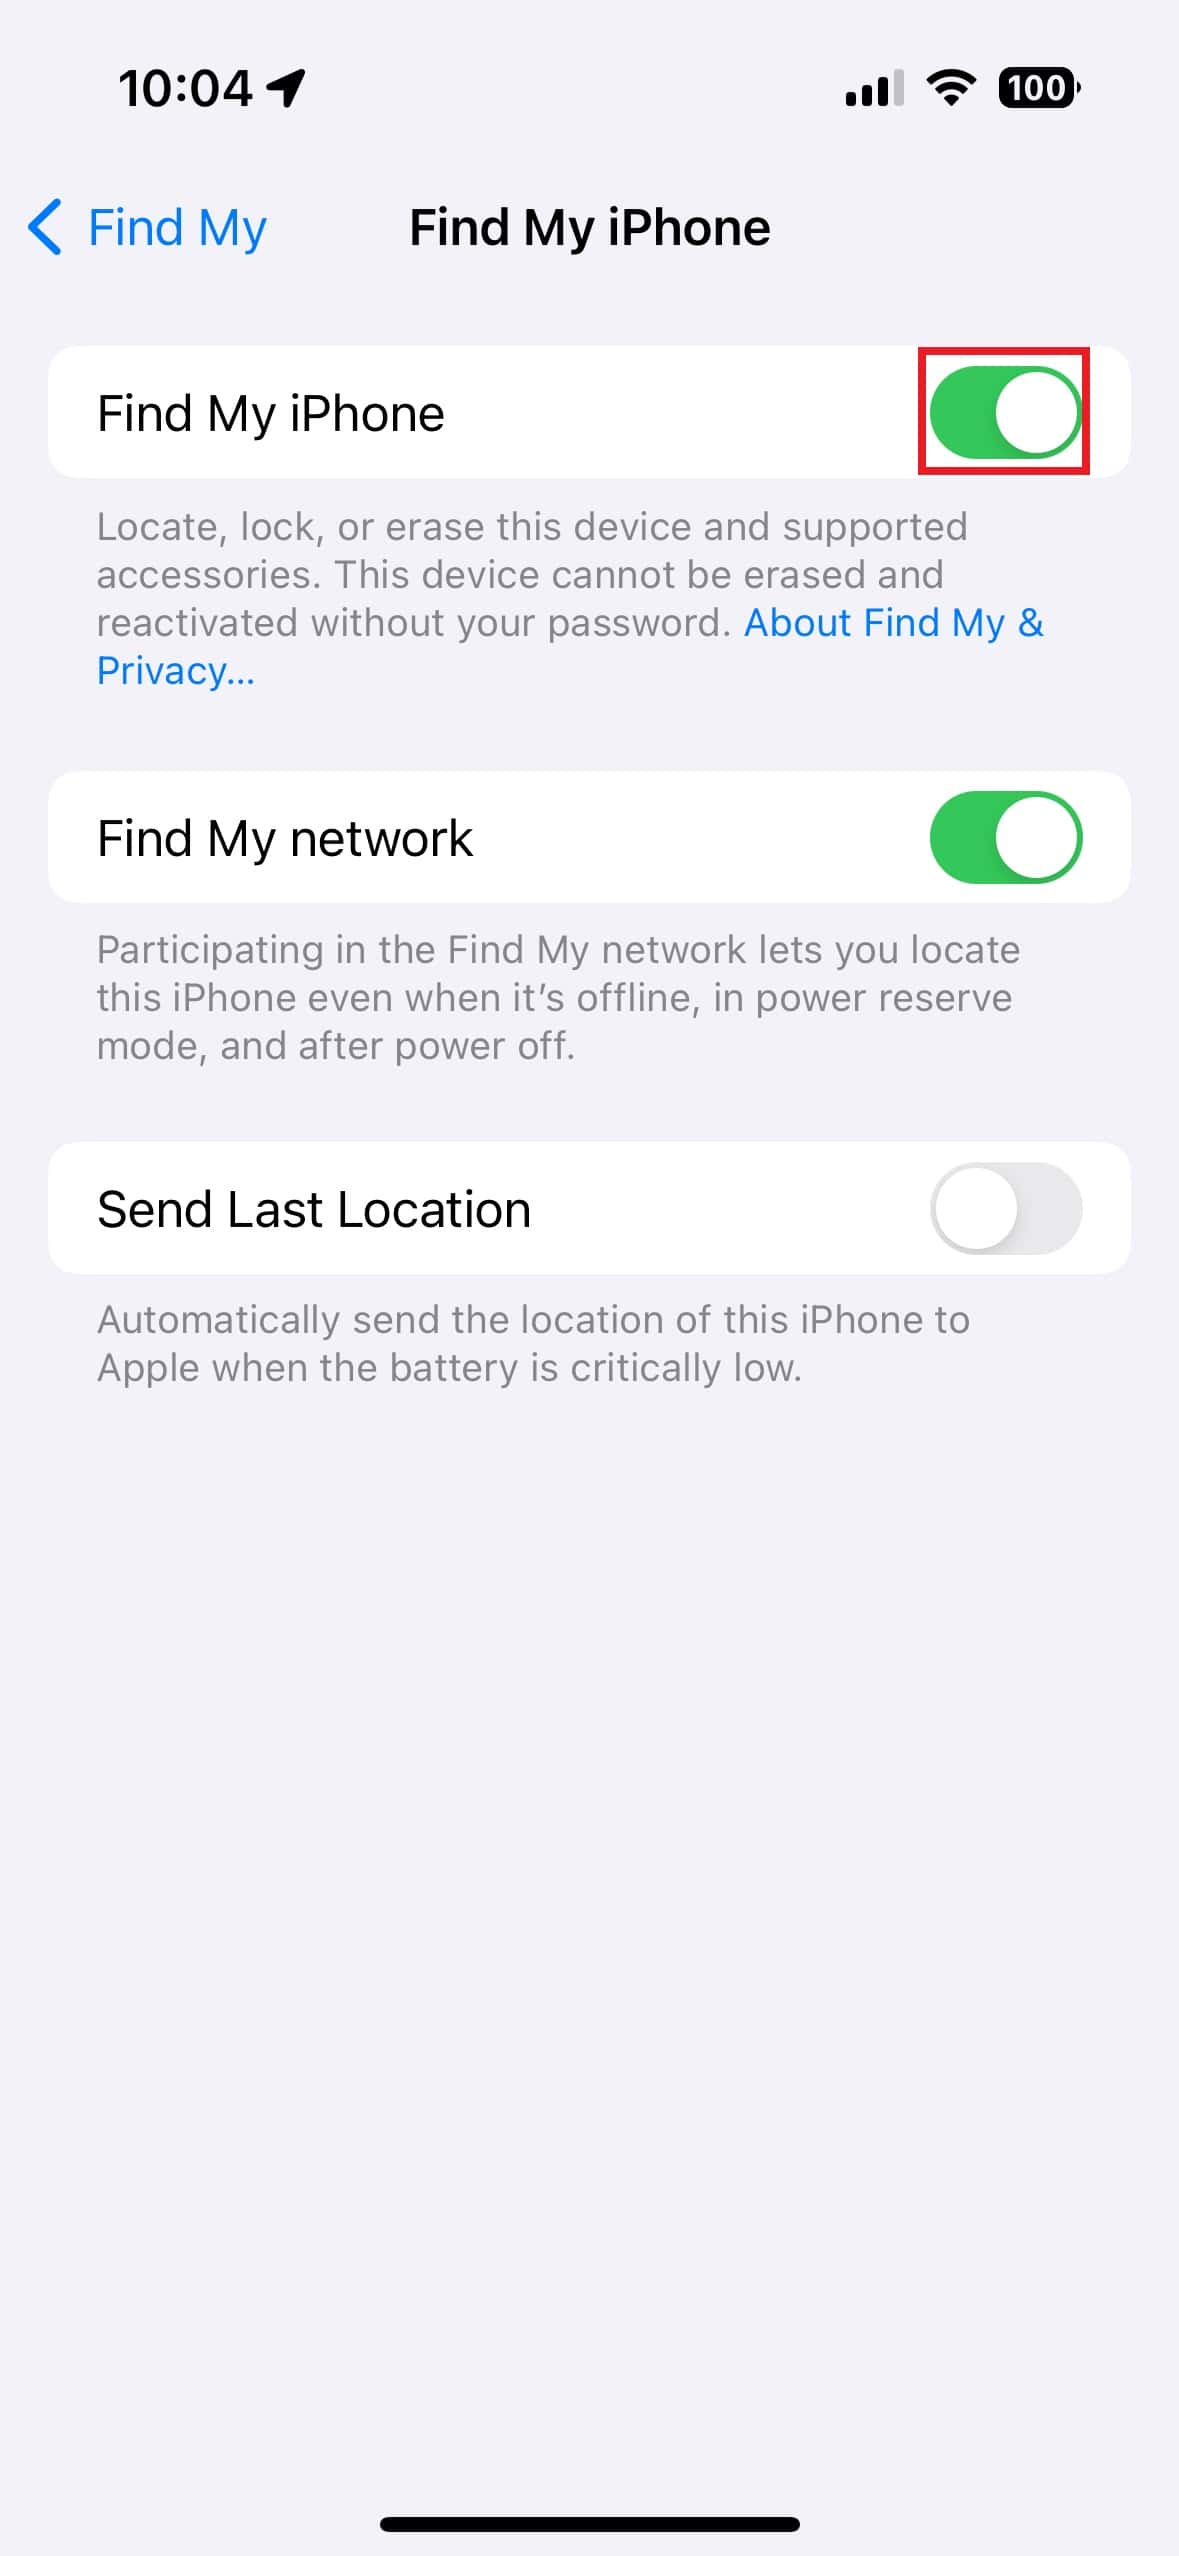 Turn off Find My iPhone in settings app